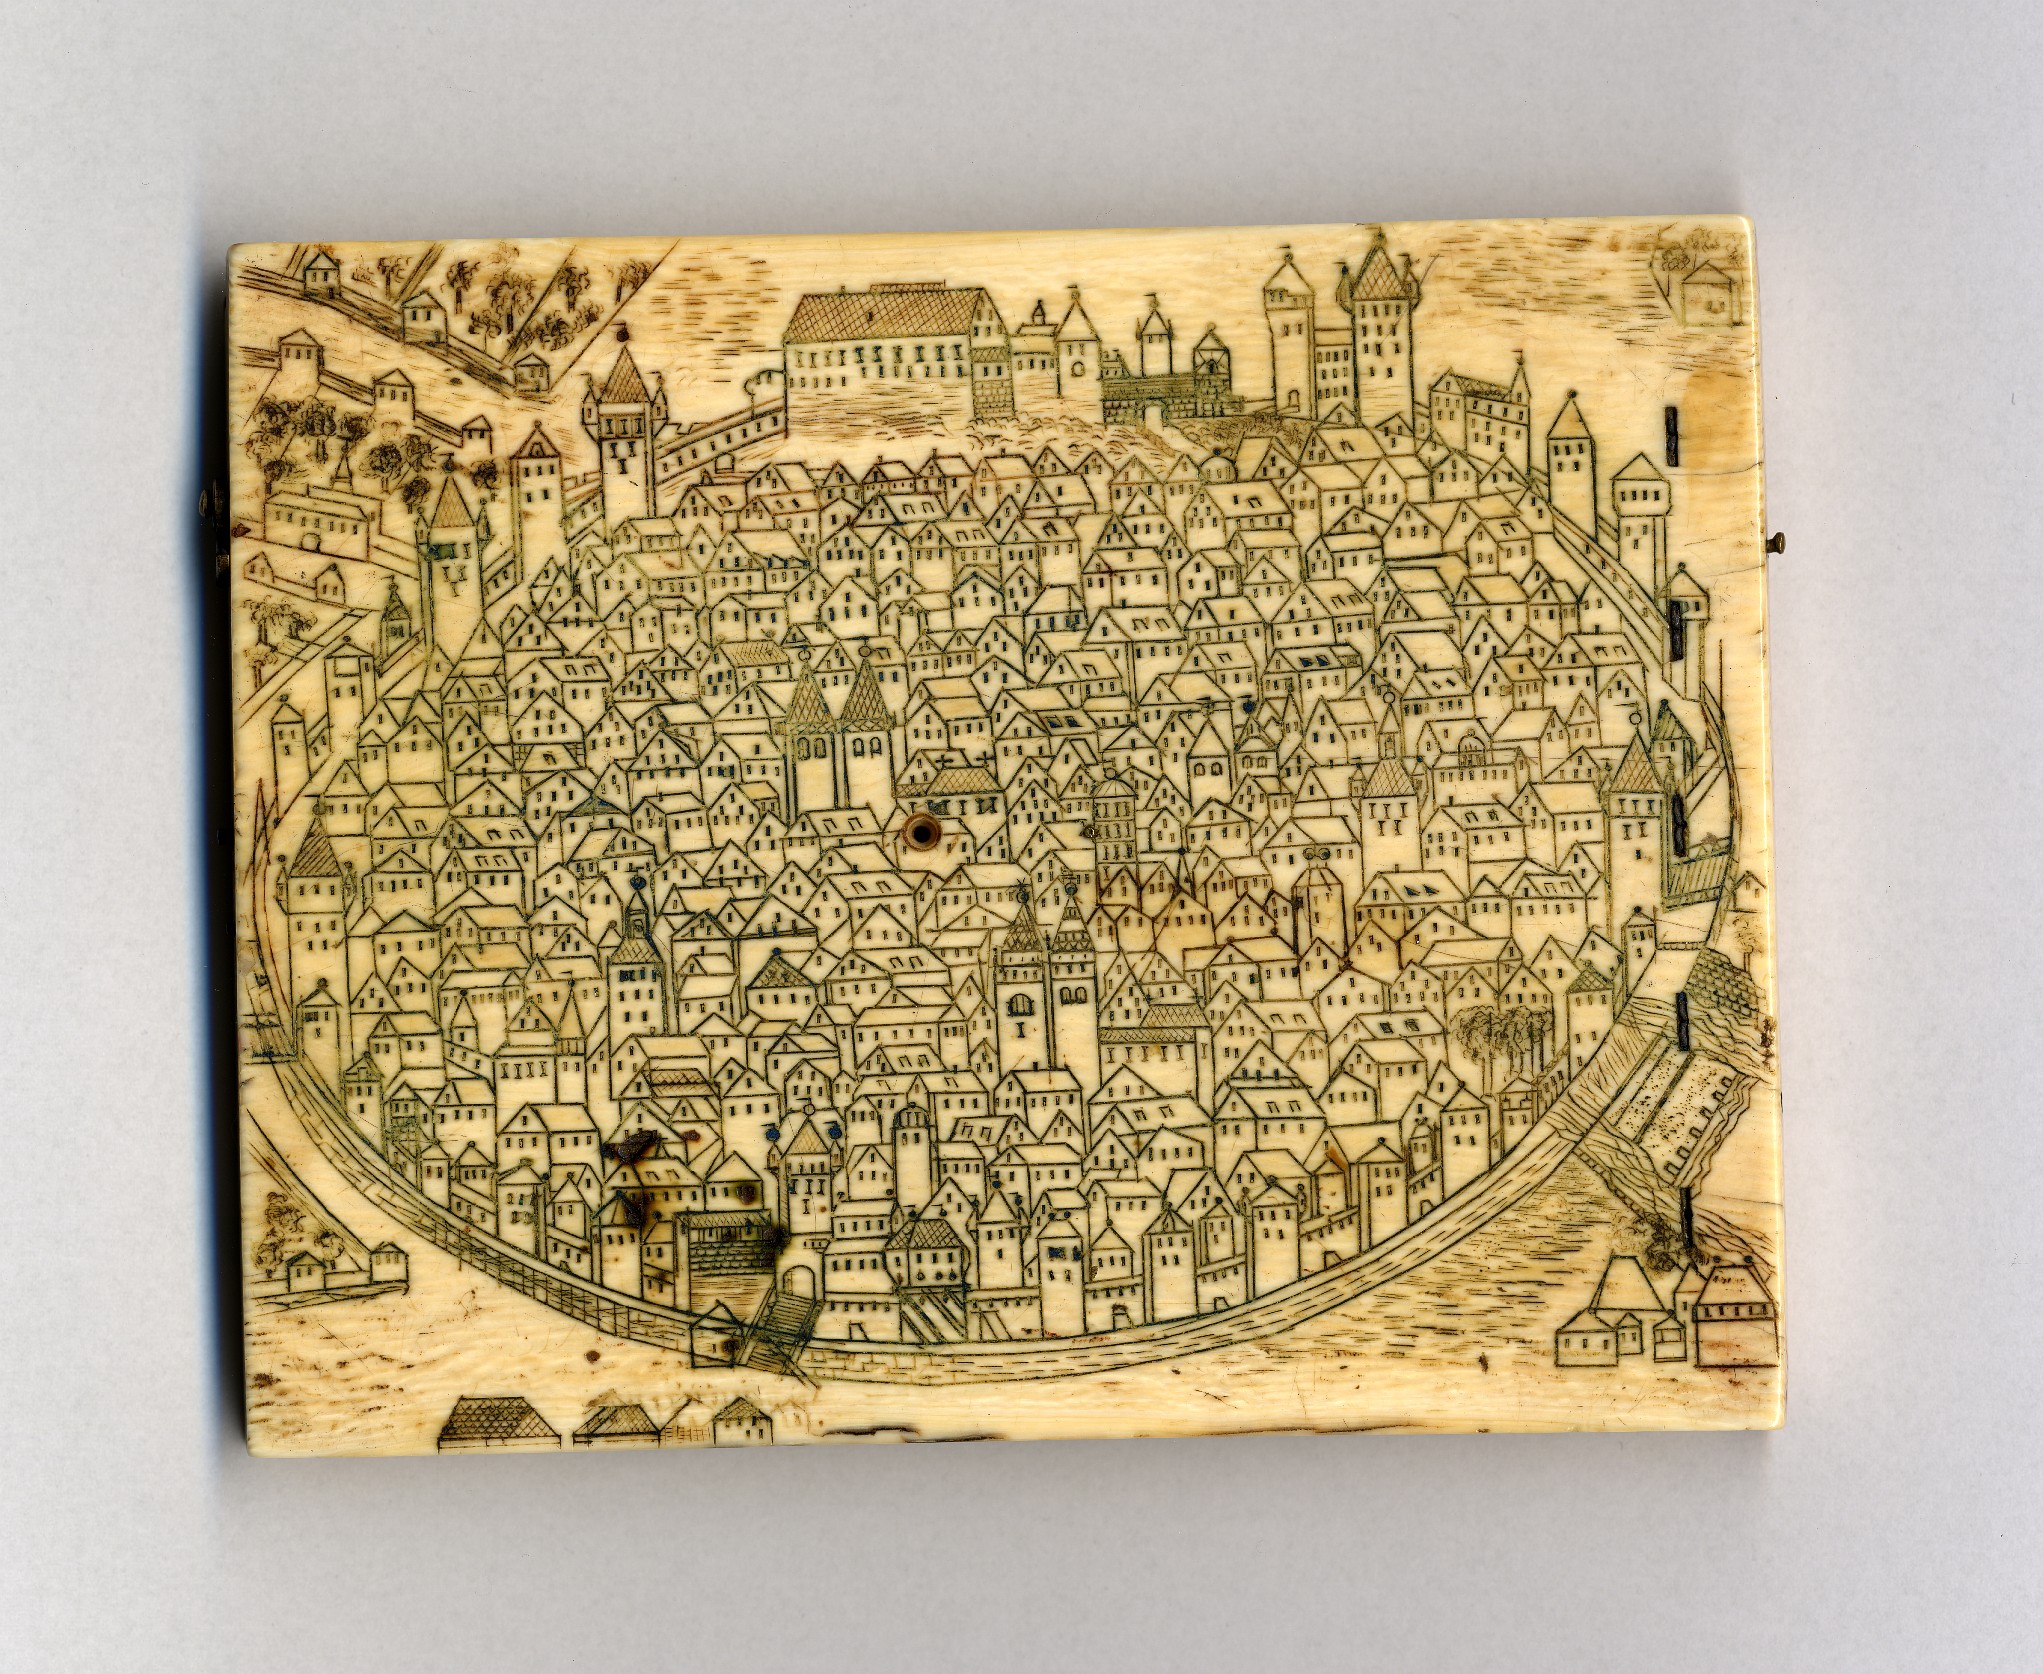 Lower leaf of a diptych dial with city view of Nuremberg, by Johann Gebhart, Nuremberg, c.1550